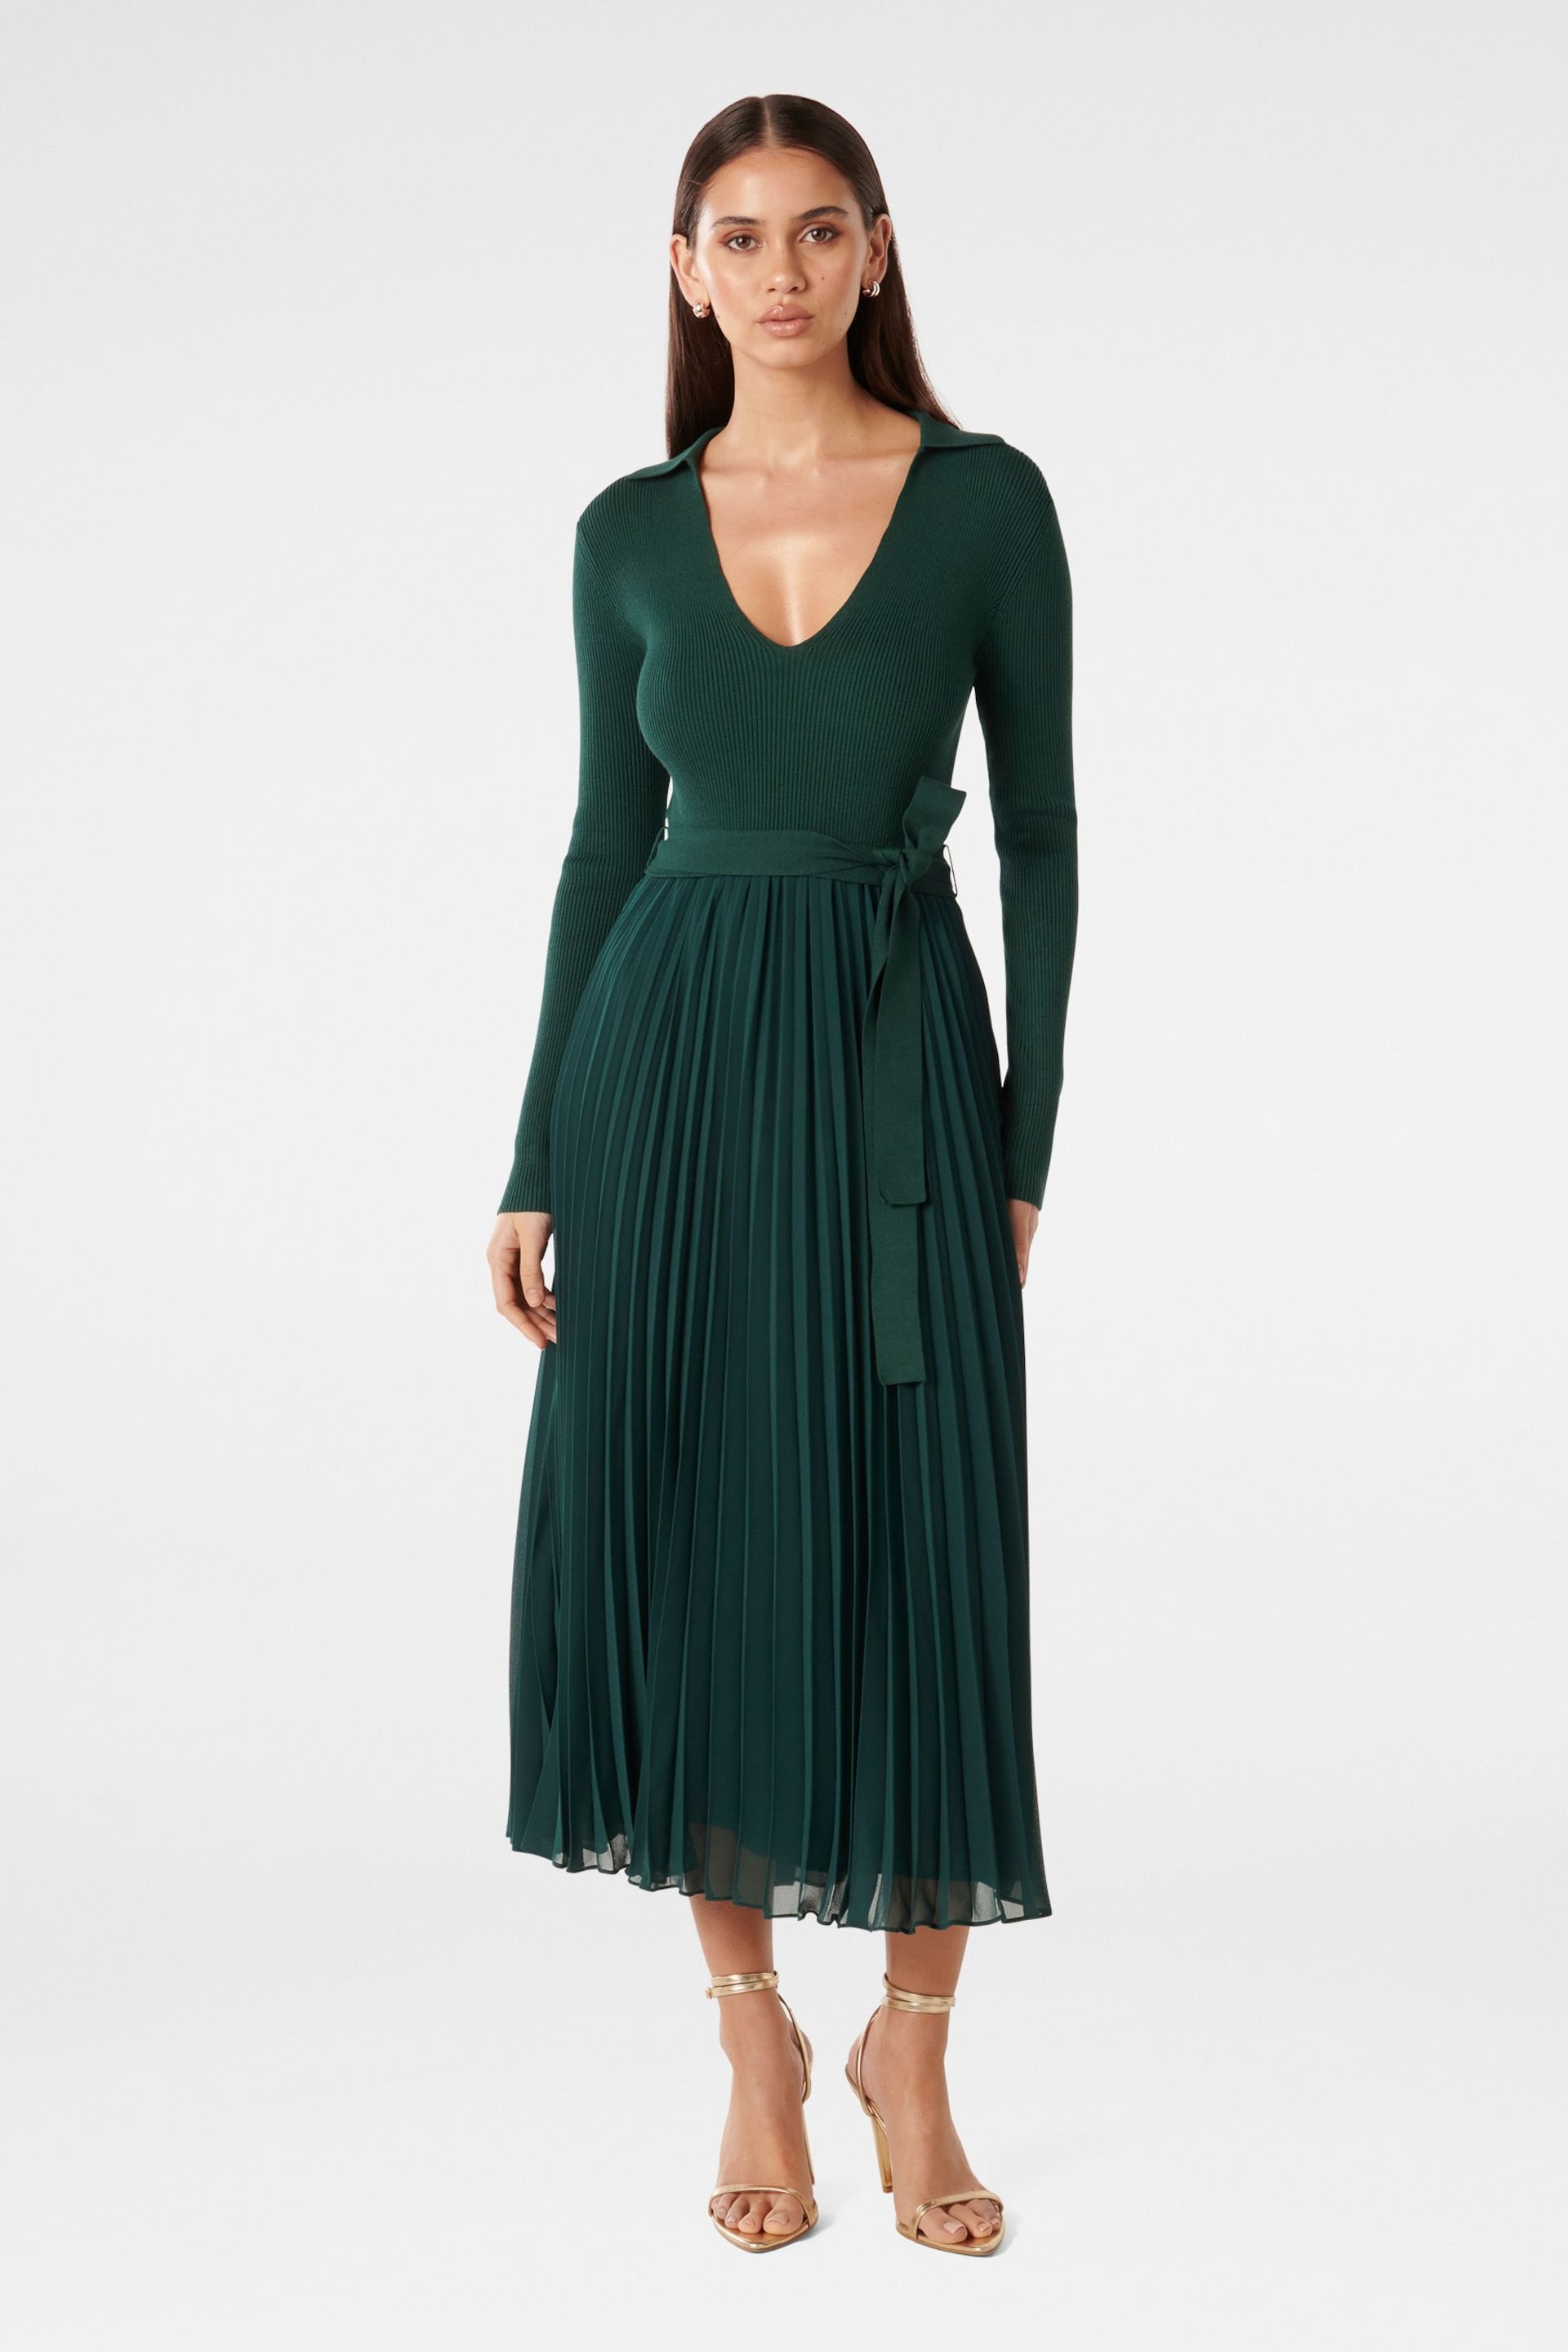 Forever New Green Posey Woven Mix Knit Dress - Image 1 of 4